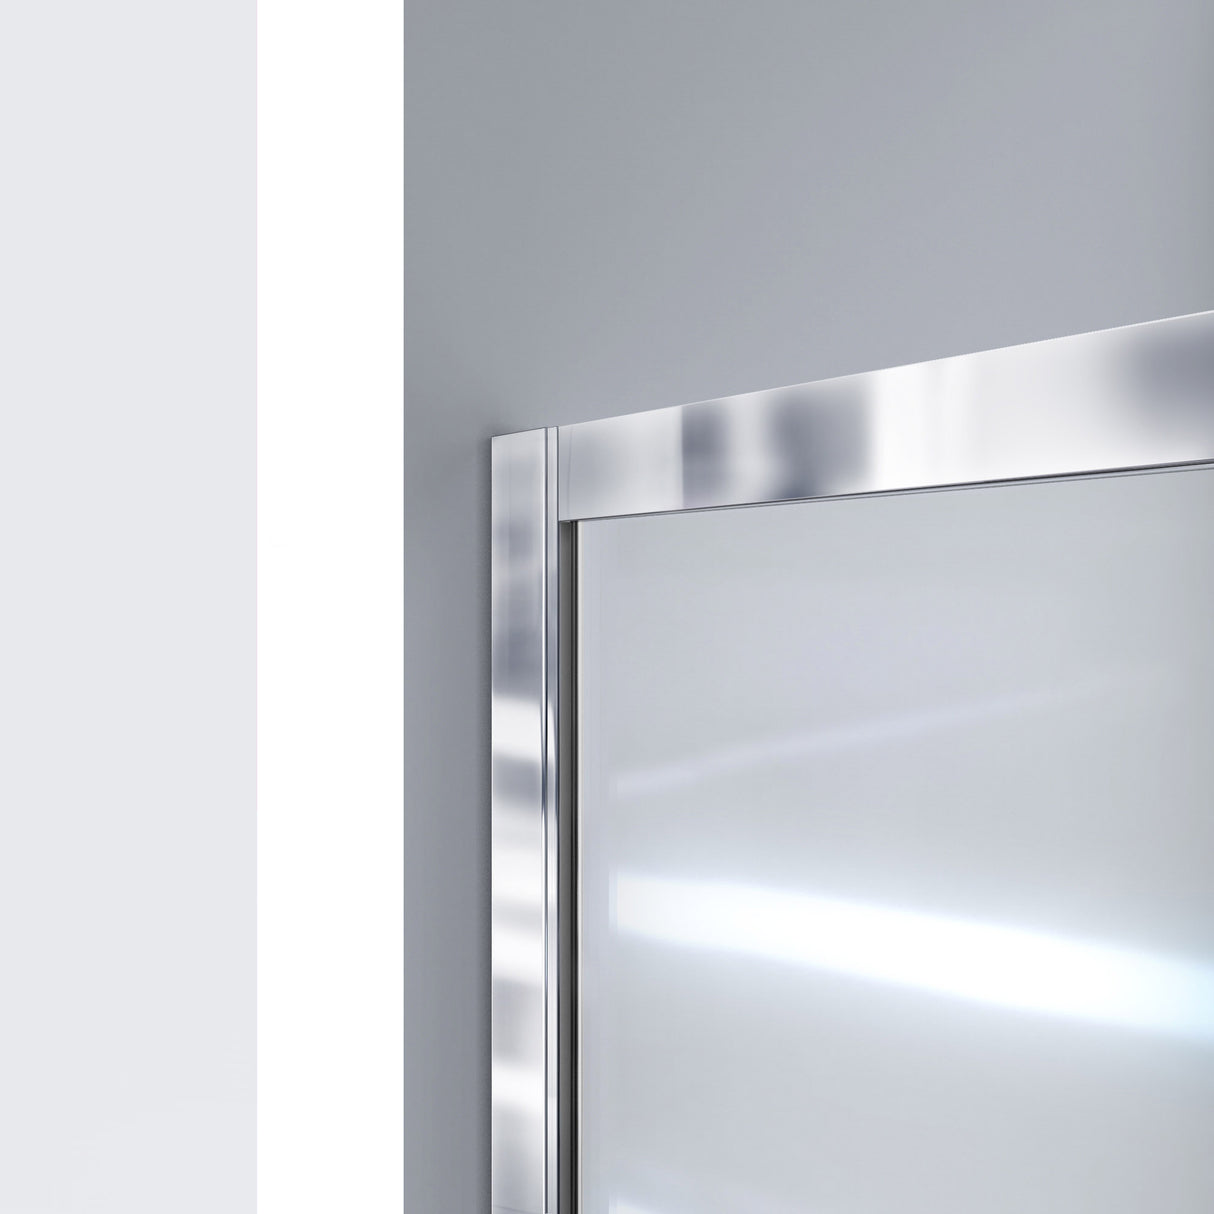 DreamLine Infinity-Z 30 in. D x 60 in. W x 78 3/4 in. H Sliding Shower Door, Base, and White Wall Kit in Brushed Nickel and Clear Glass